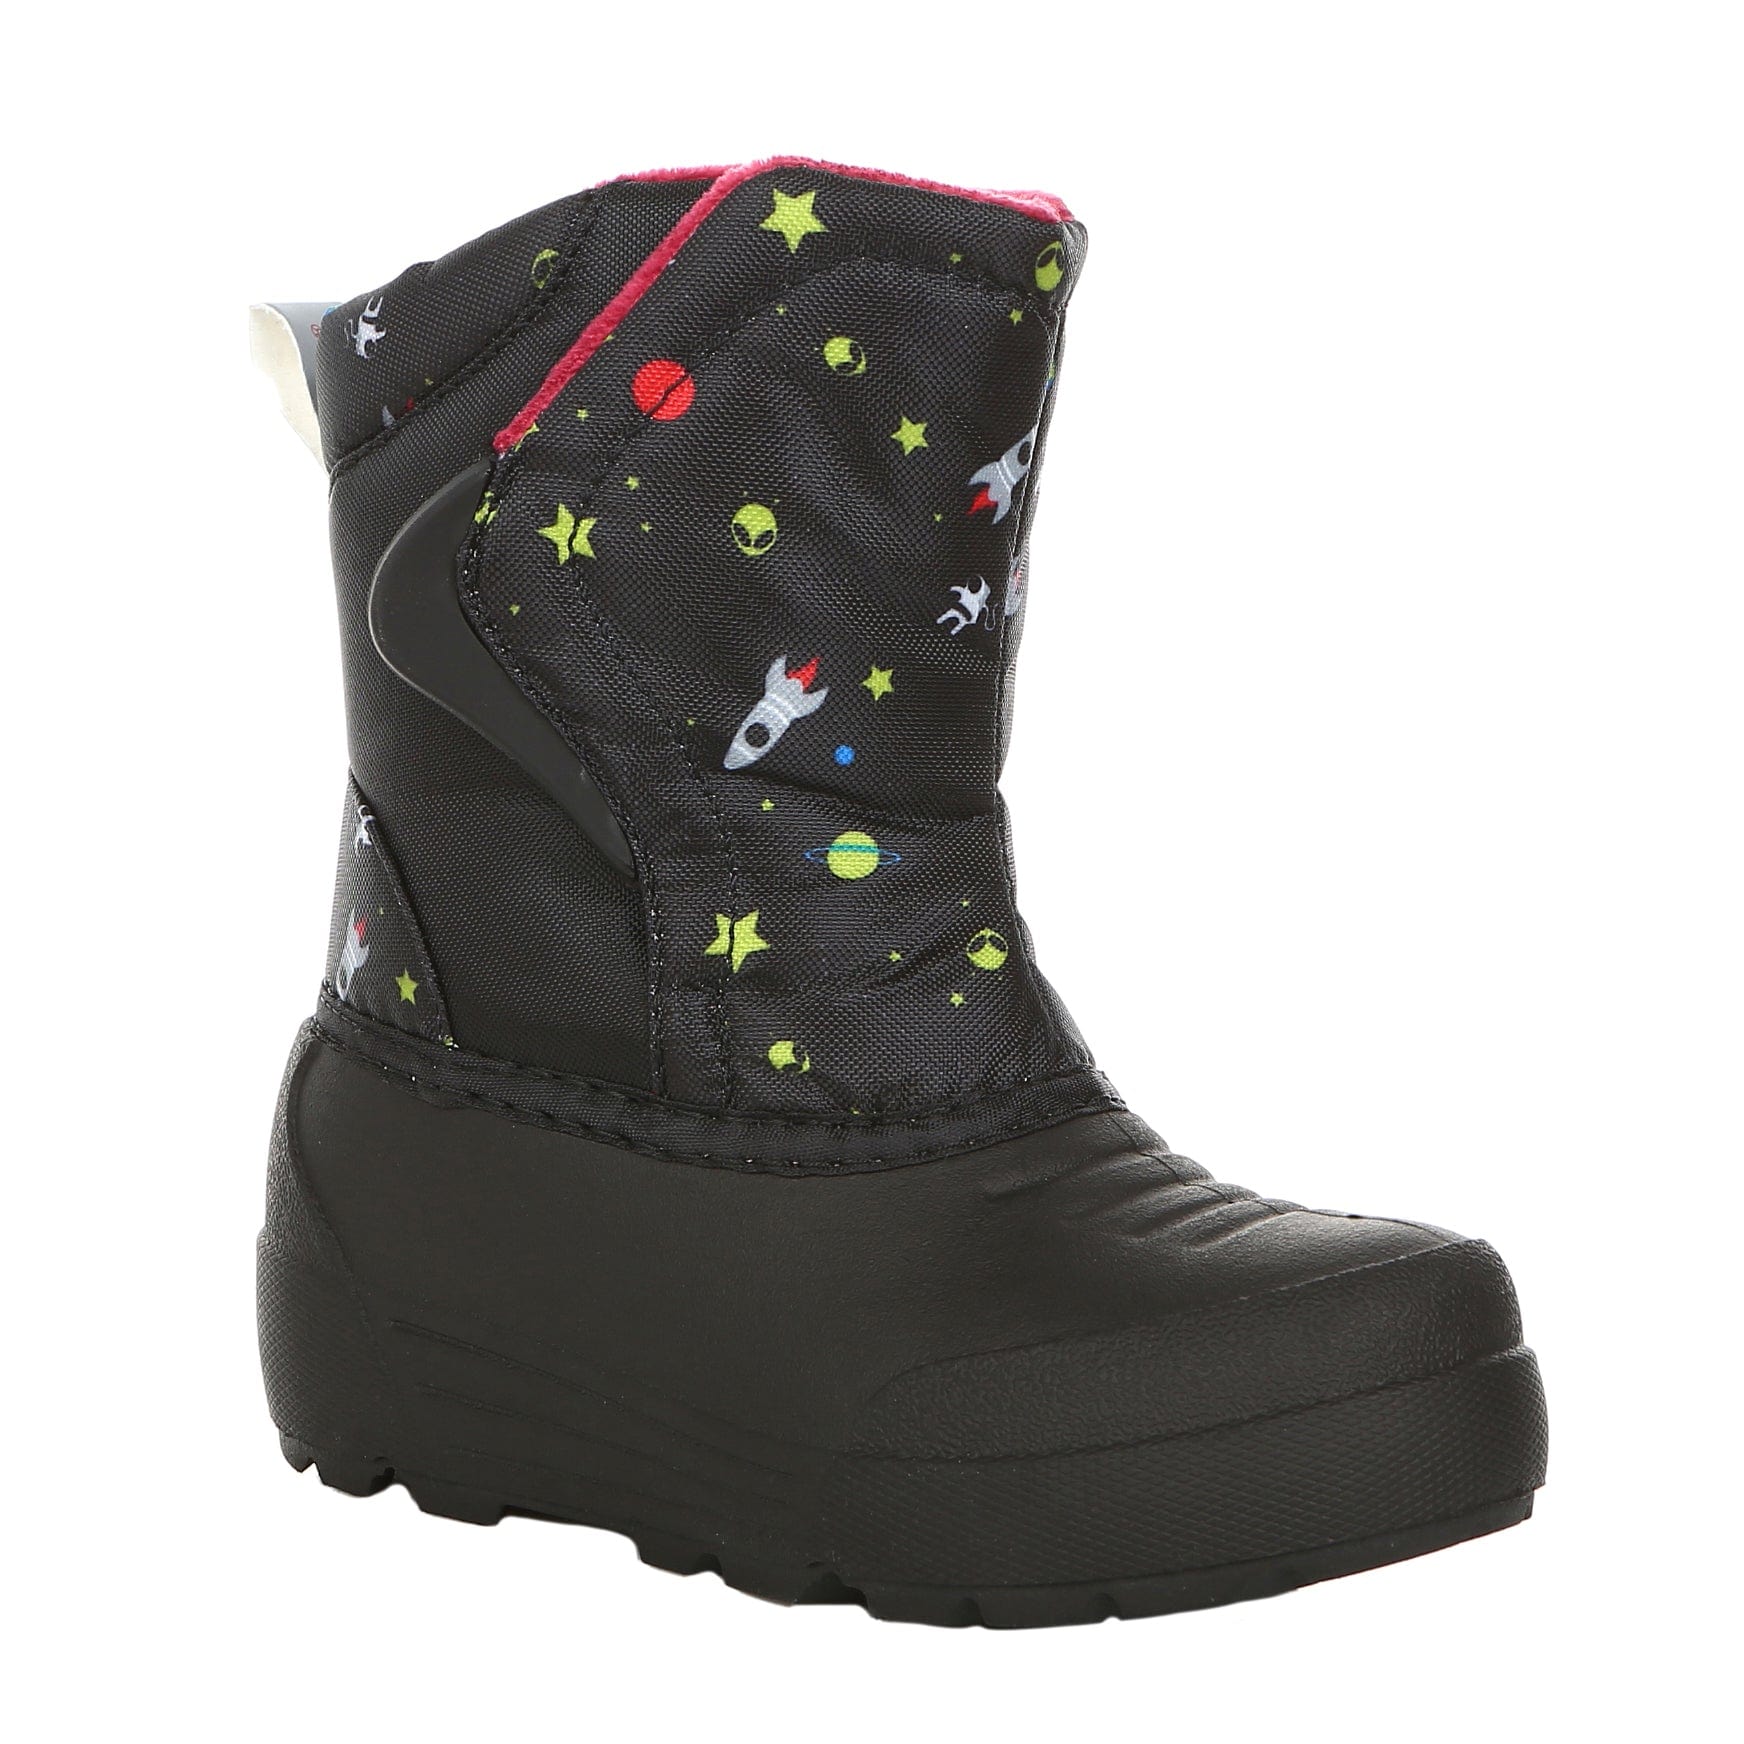 Toddler's Flurrie Insulated Winter Snow Boot - Northside USA